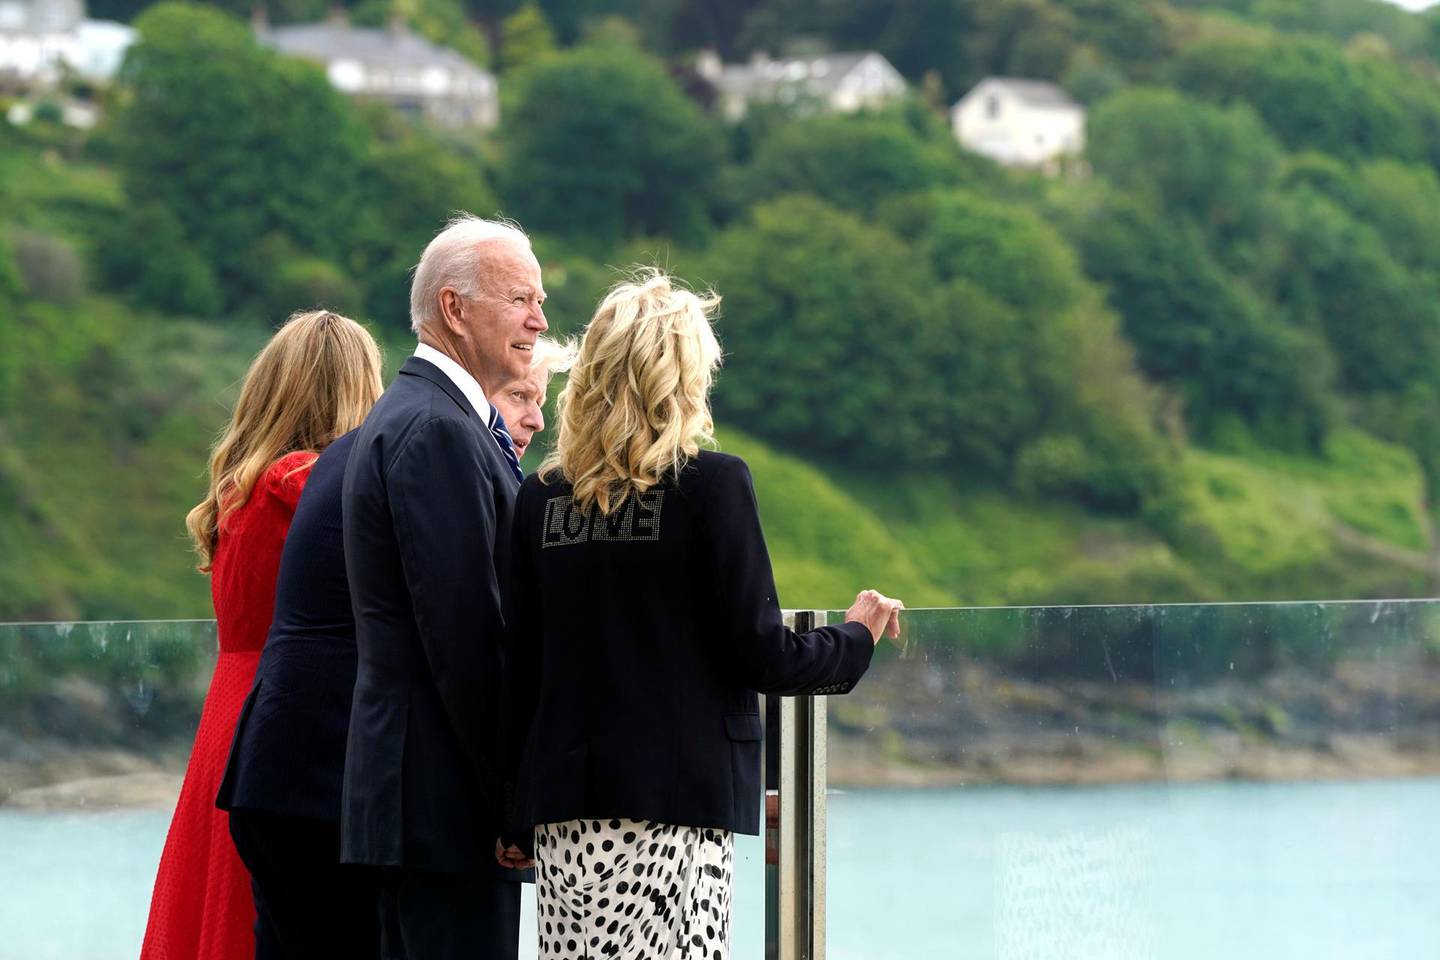 President Joe Biden and first lady Jill Biden are greeted by British Prime Minister Boris Johnson and his wife Carrie Johnson, ahead of the G-7 summit, Thursday, June 10, 2021, in Carbis Bay, England. (AP Photo/Patrick Semansky)